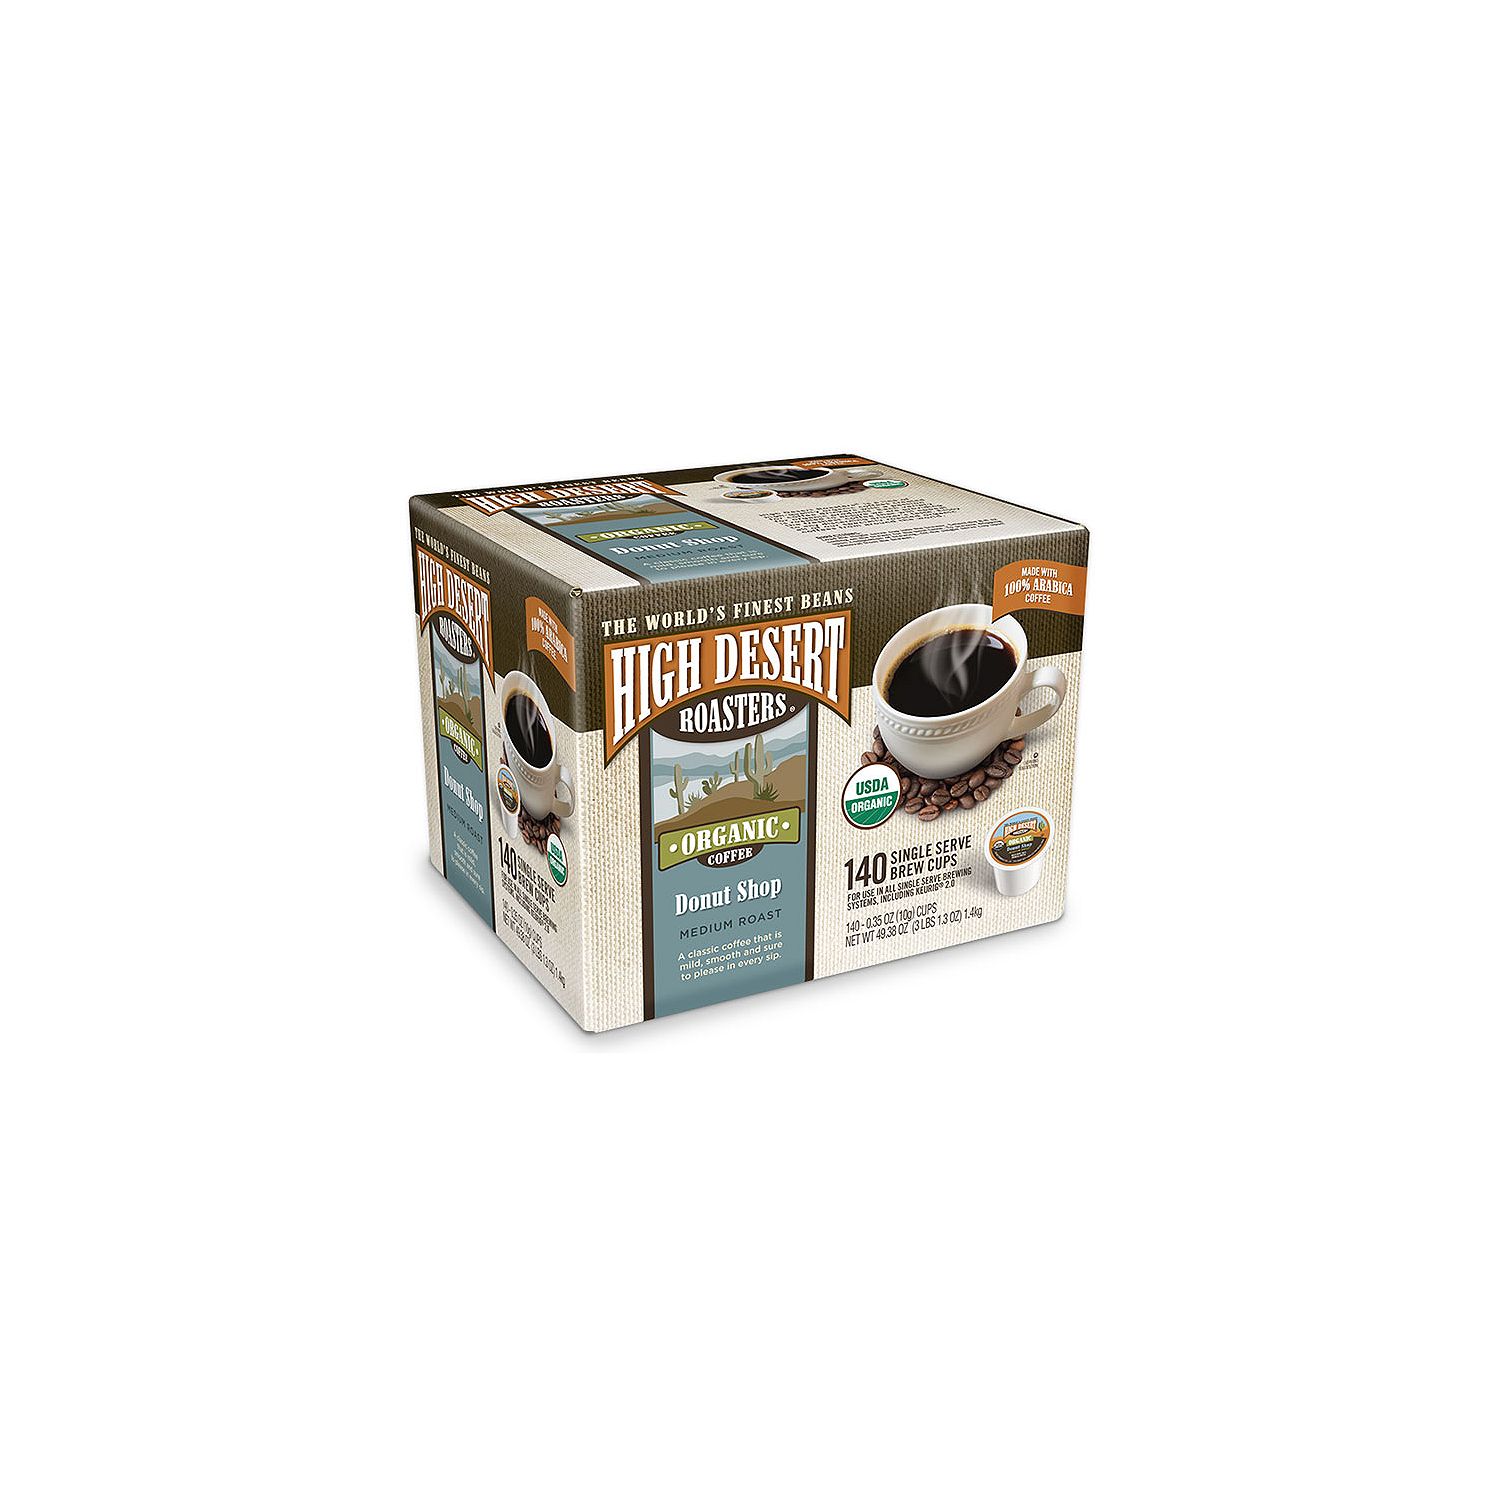 140-count High Desert Roasters donut shop coffee K-cups for $33